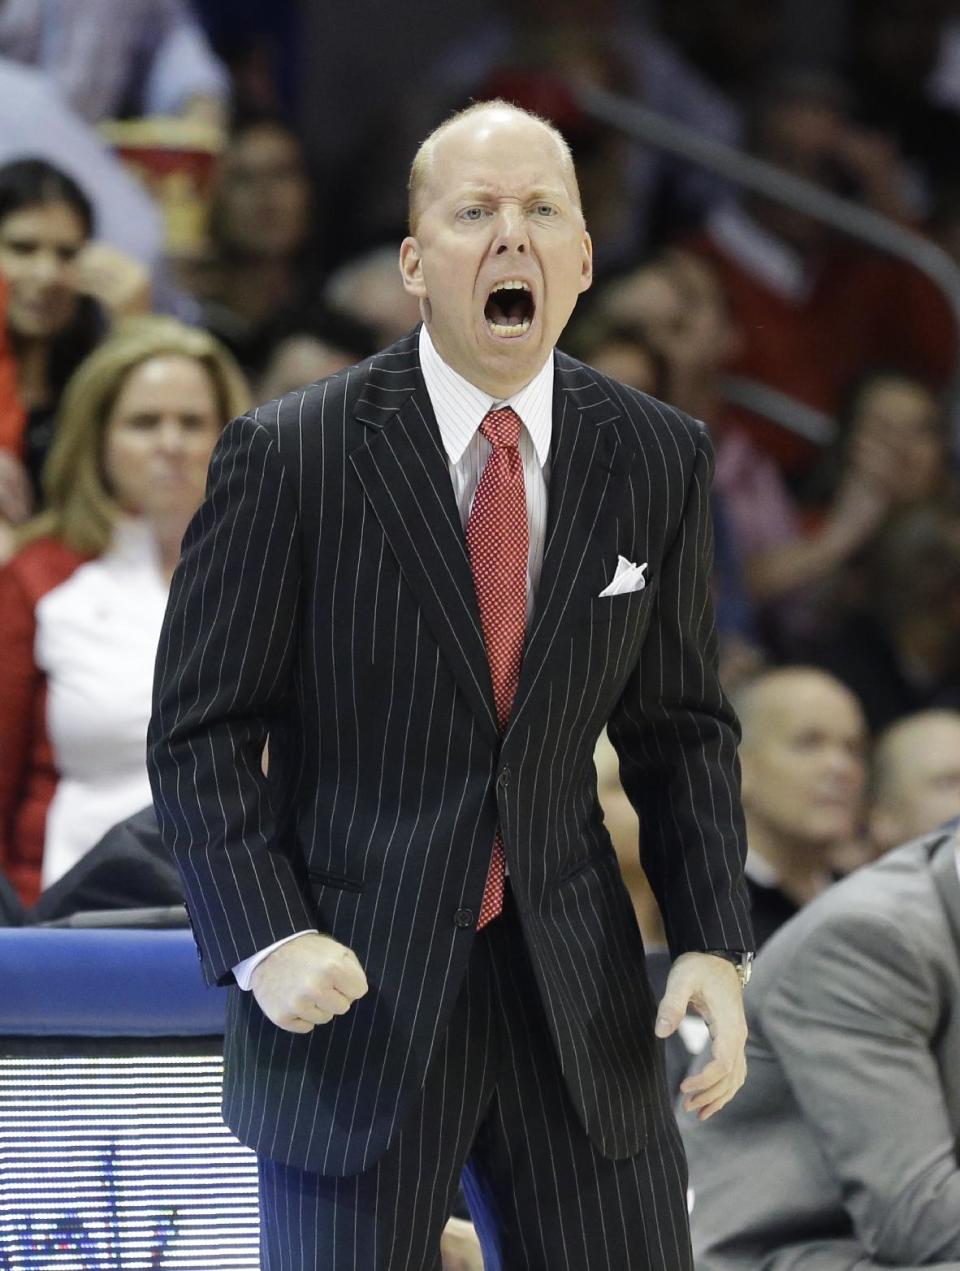 Cincinnati coach Mick Cronin yells from the sideline during the first half of an NCAA college basketball game against SMU on Saturday, Feb. 8, 2014, in Dallas. (AP Photo/LM Otero) vcb